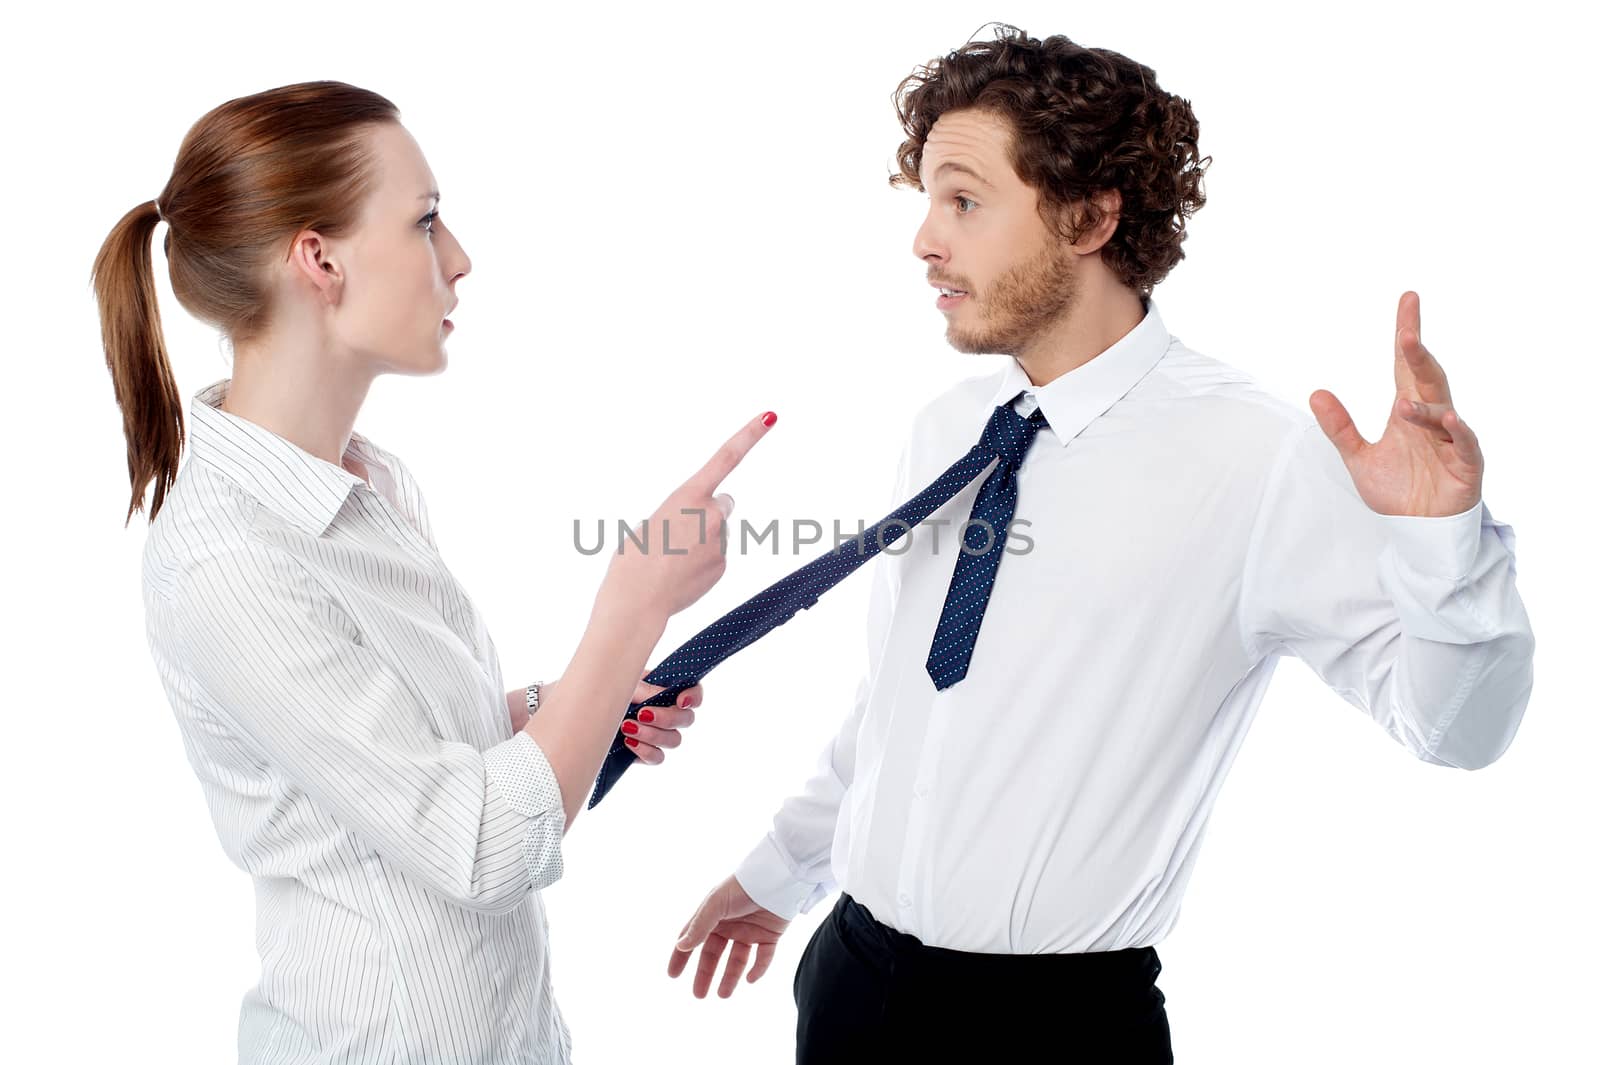 Female executive scolding her coworker